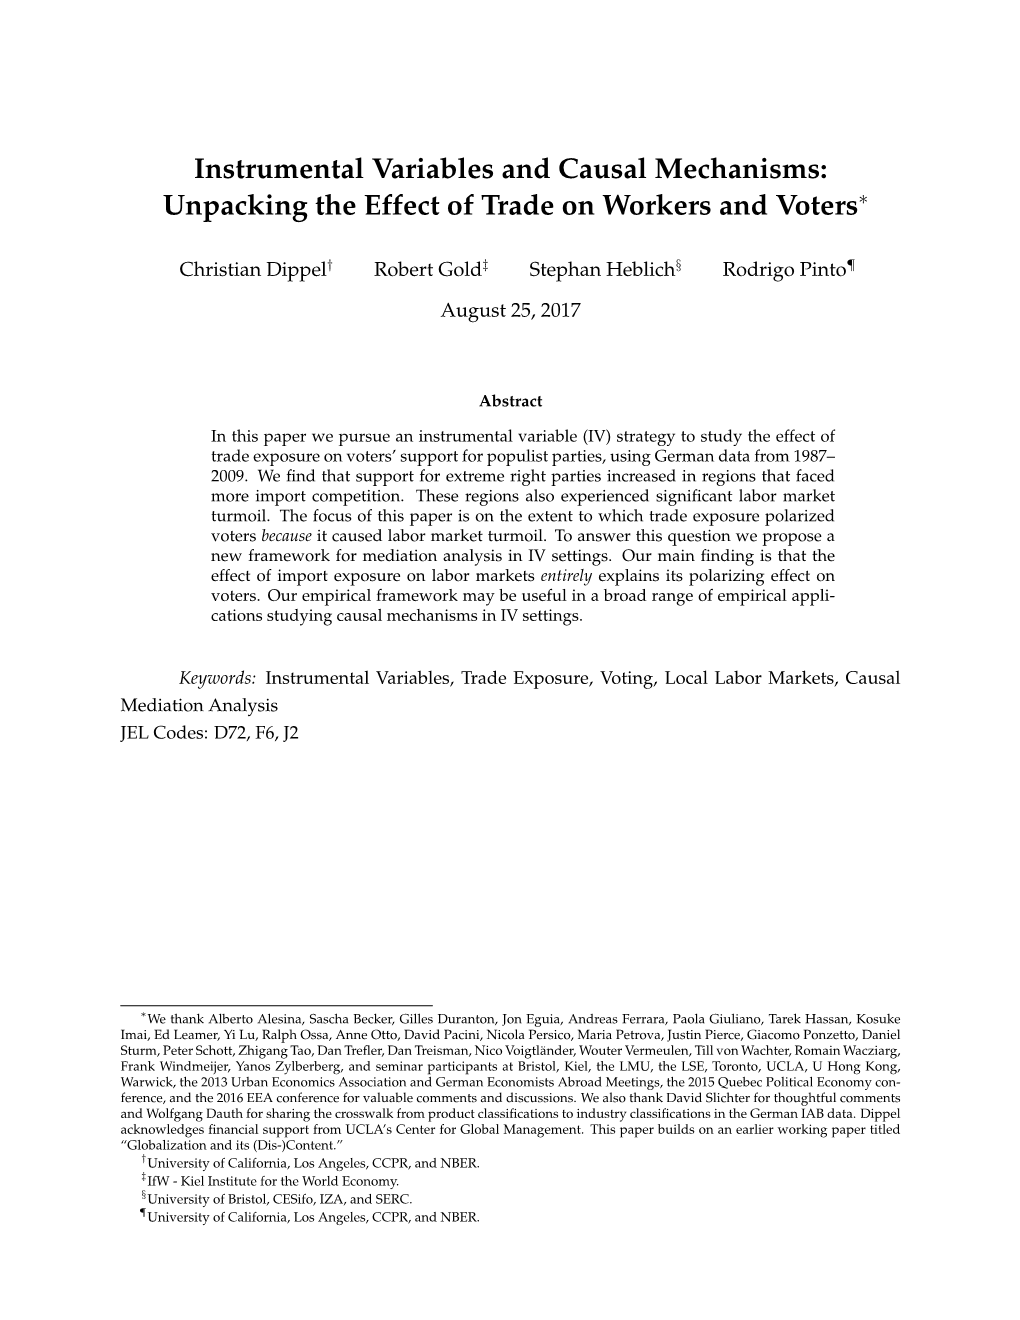 Instrumental Variables and Causal Mechanisms: Unpacking the Effect of Trade on Workers and Voters∗